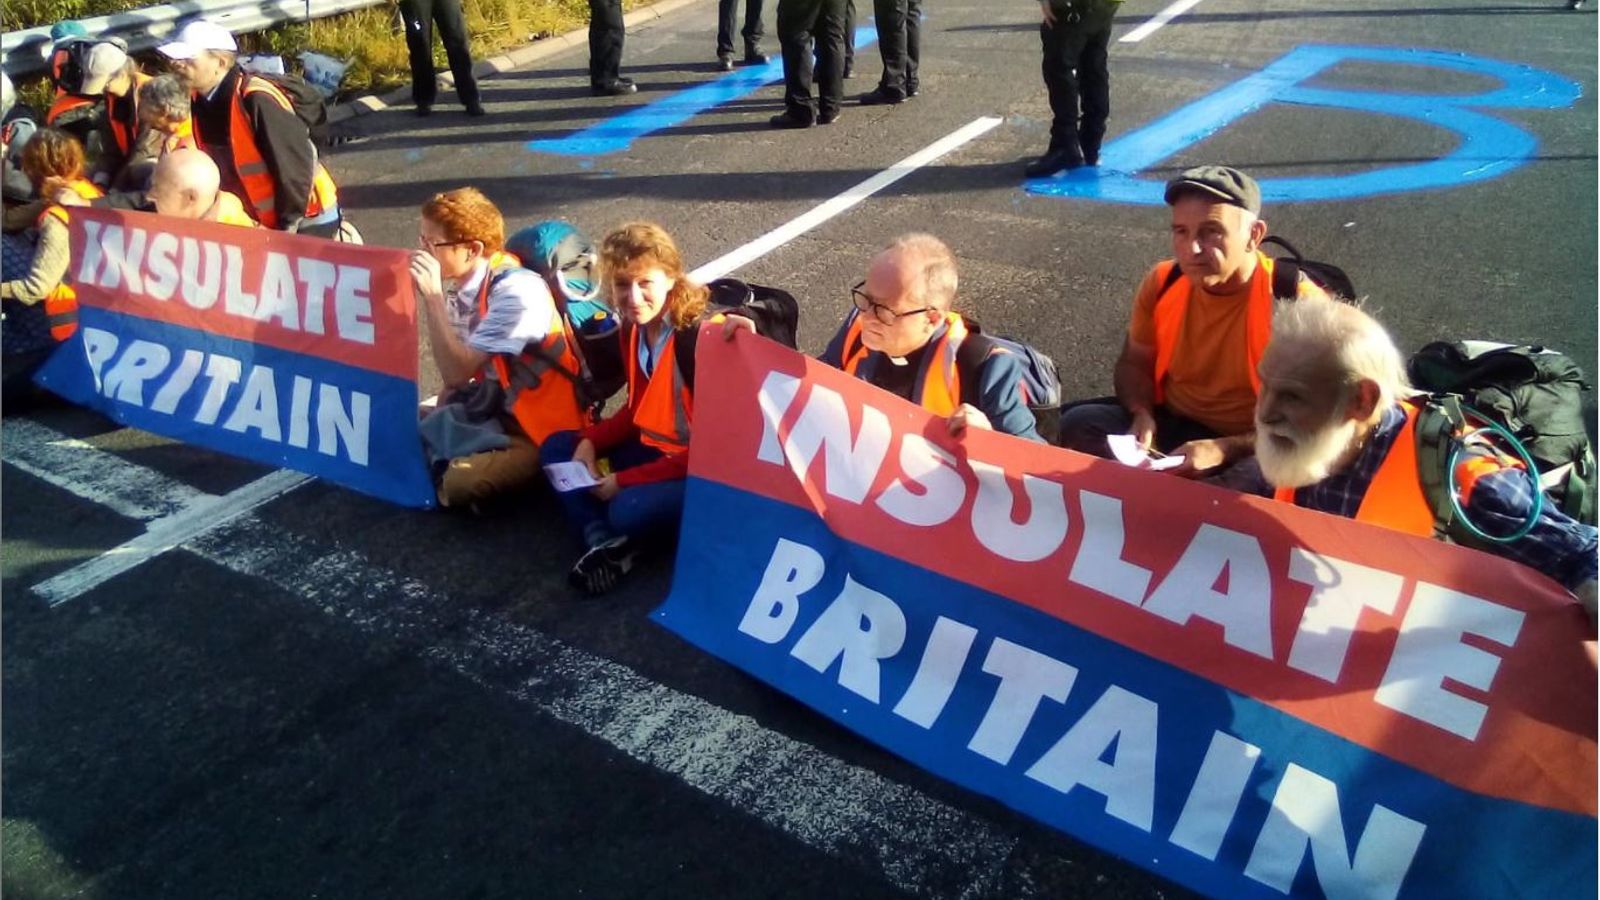 Blocking M25 as part of Insulate Britain protests ‘legitimate’ and ‘reasonable’, says Green MP Caroline Lucas